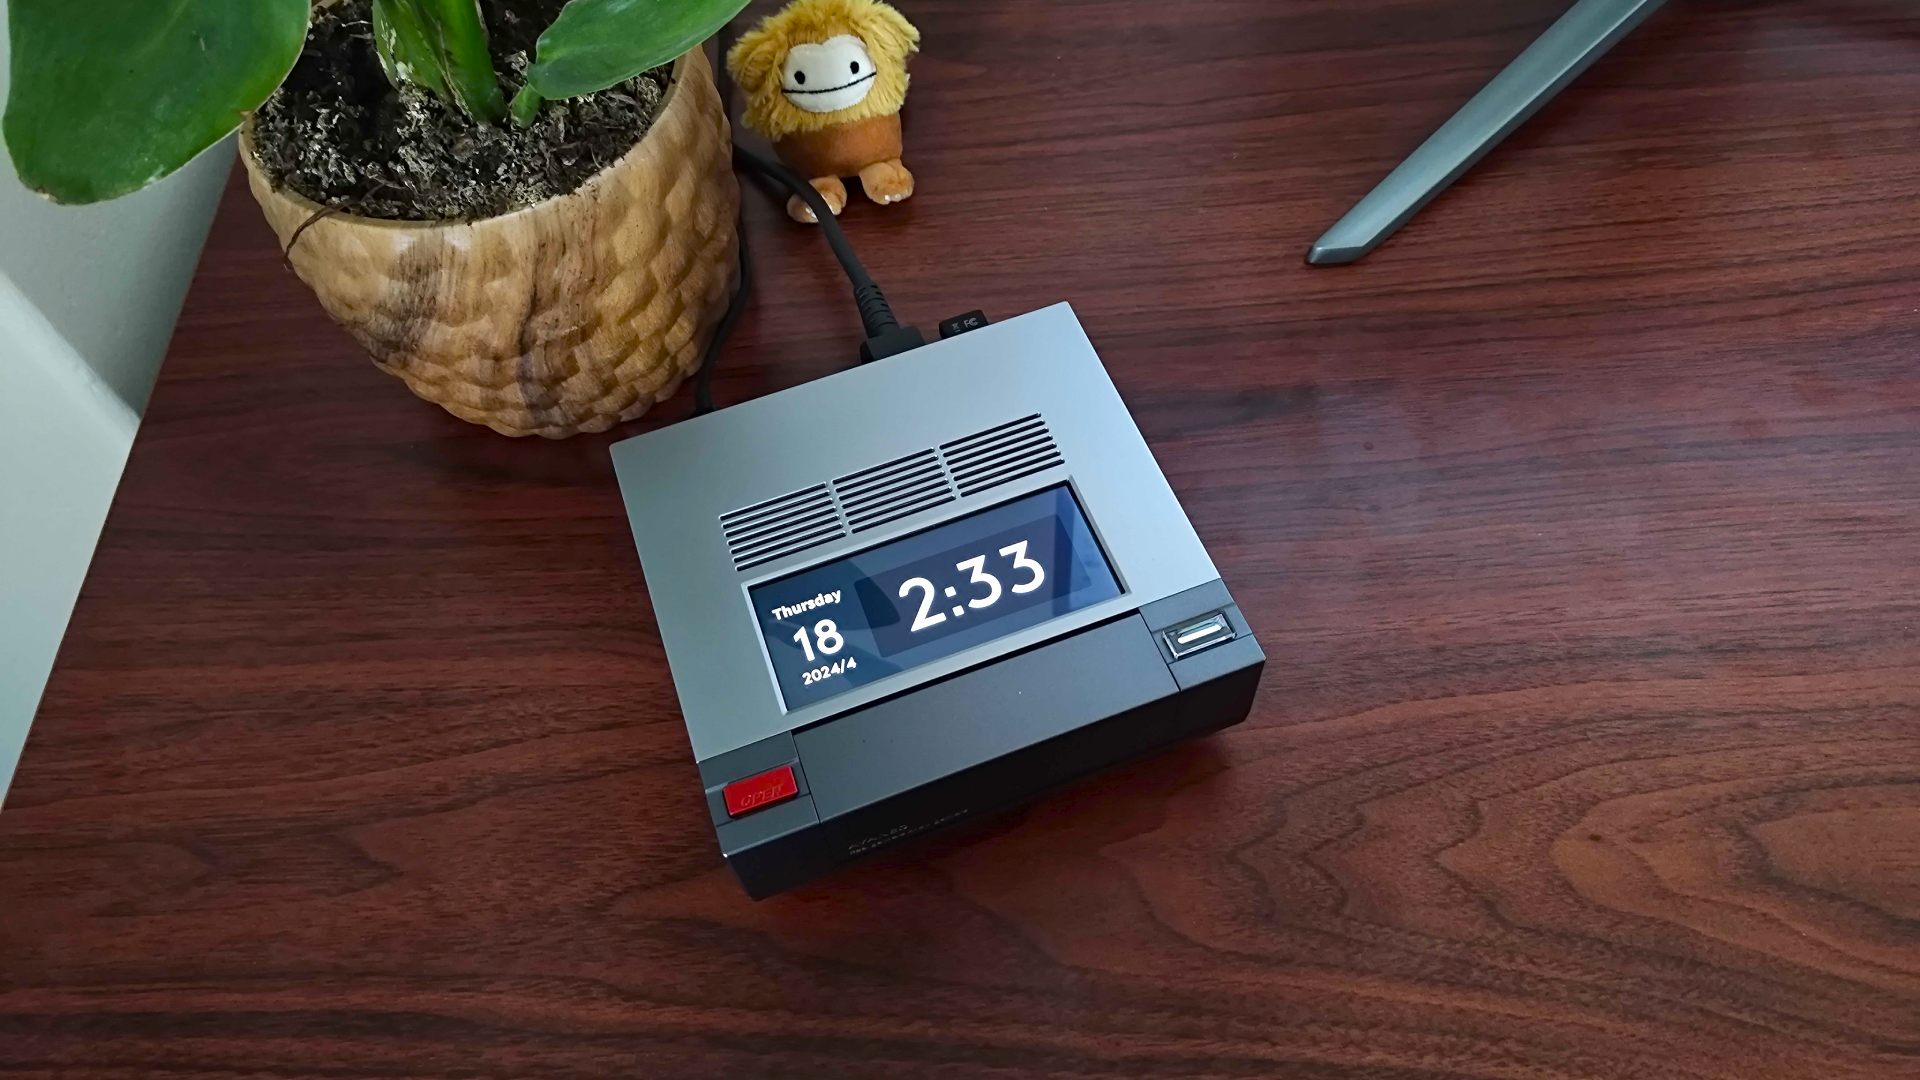 Ayaneo Mini PC AM02 with 24 hour clock on top screen sitting on woodgrain desk next to plant